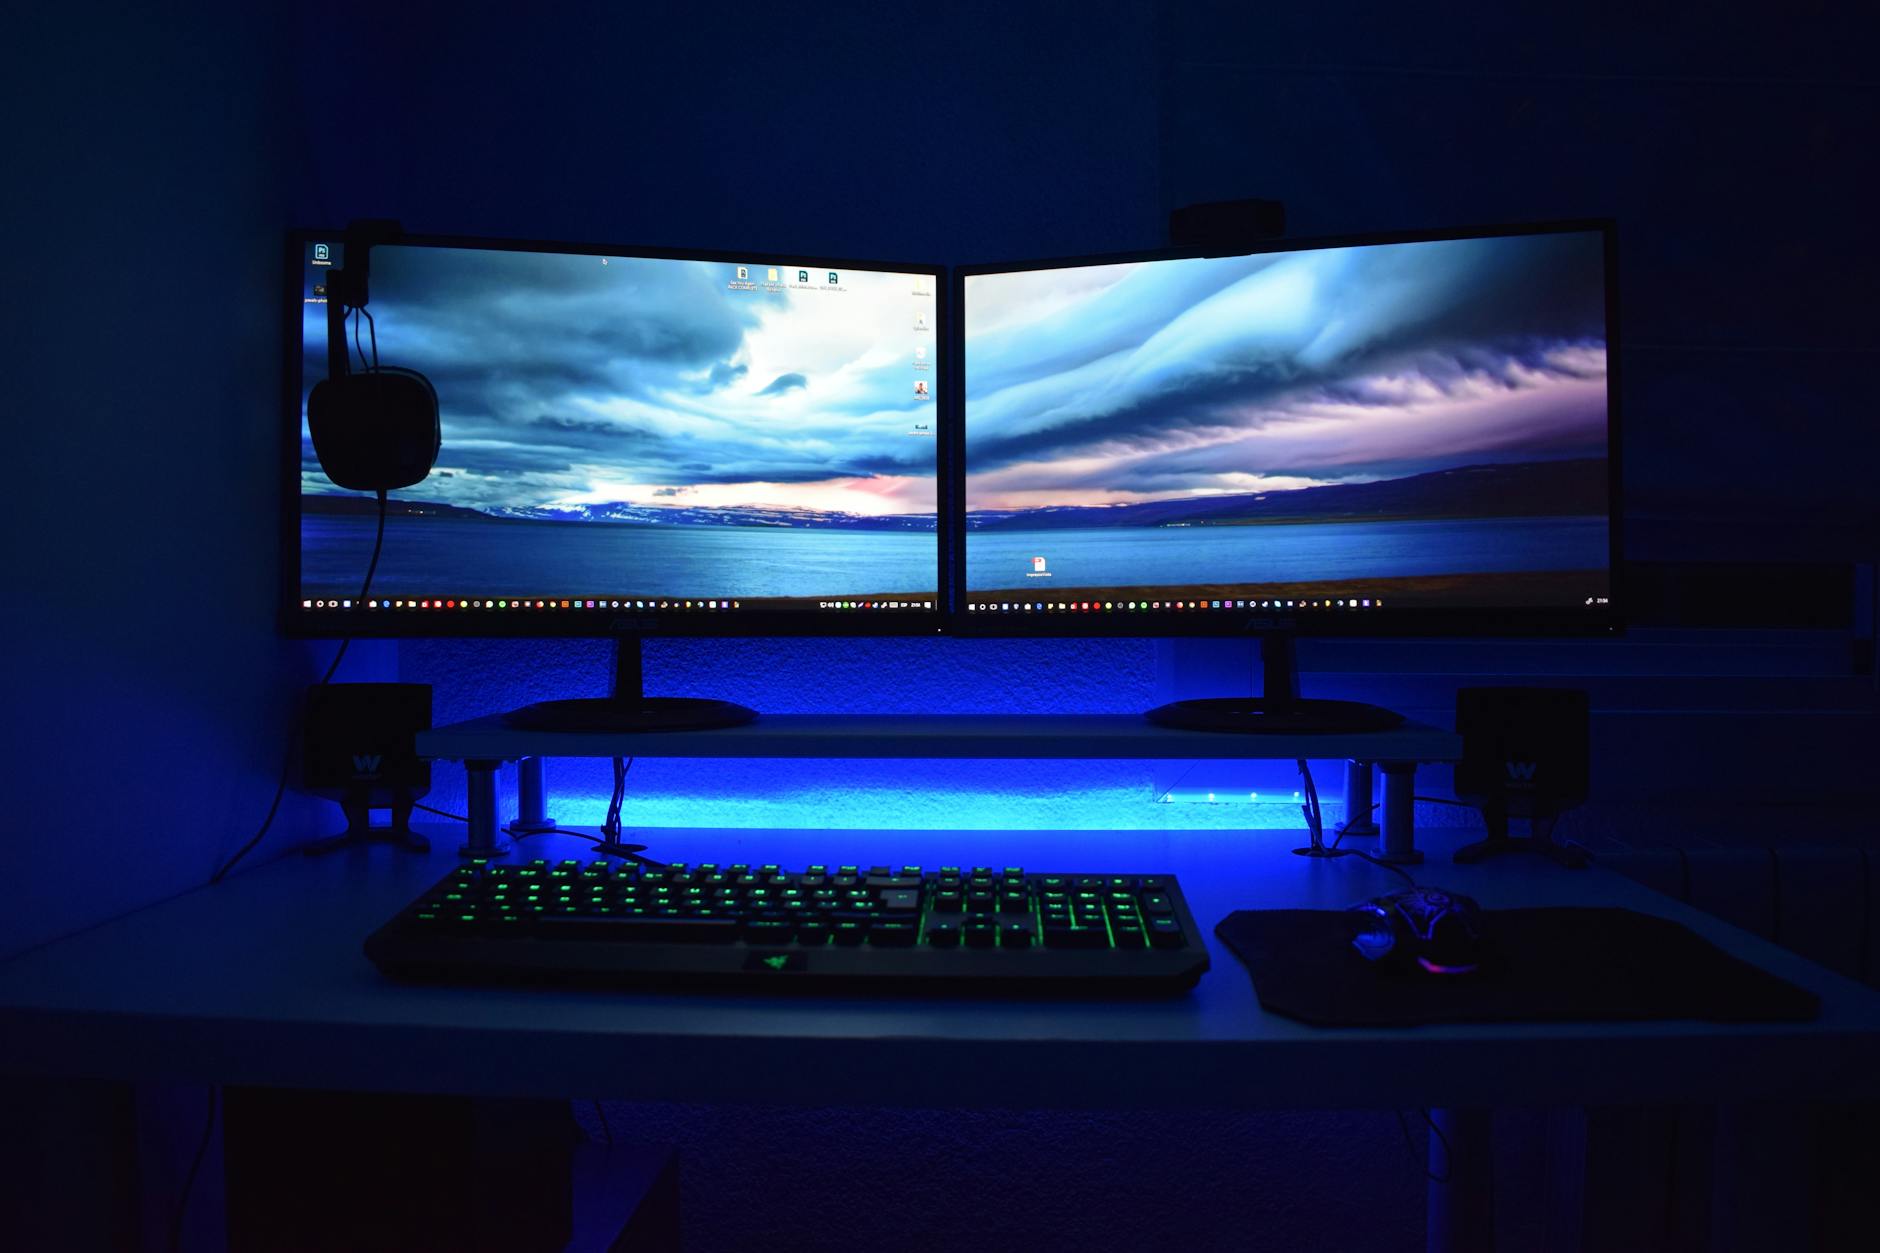 Image of two desktop monitors and a keyboard with blue background lights.